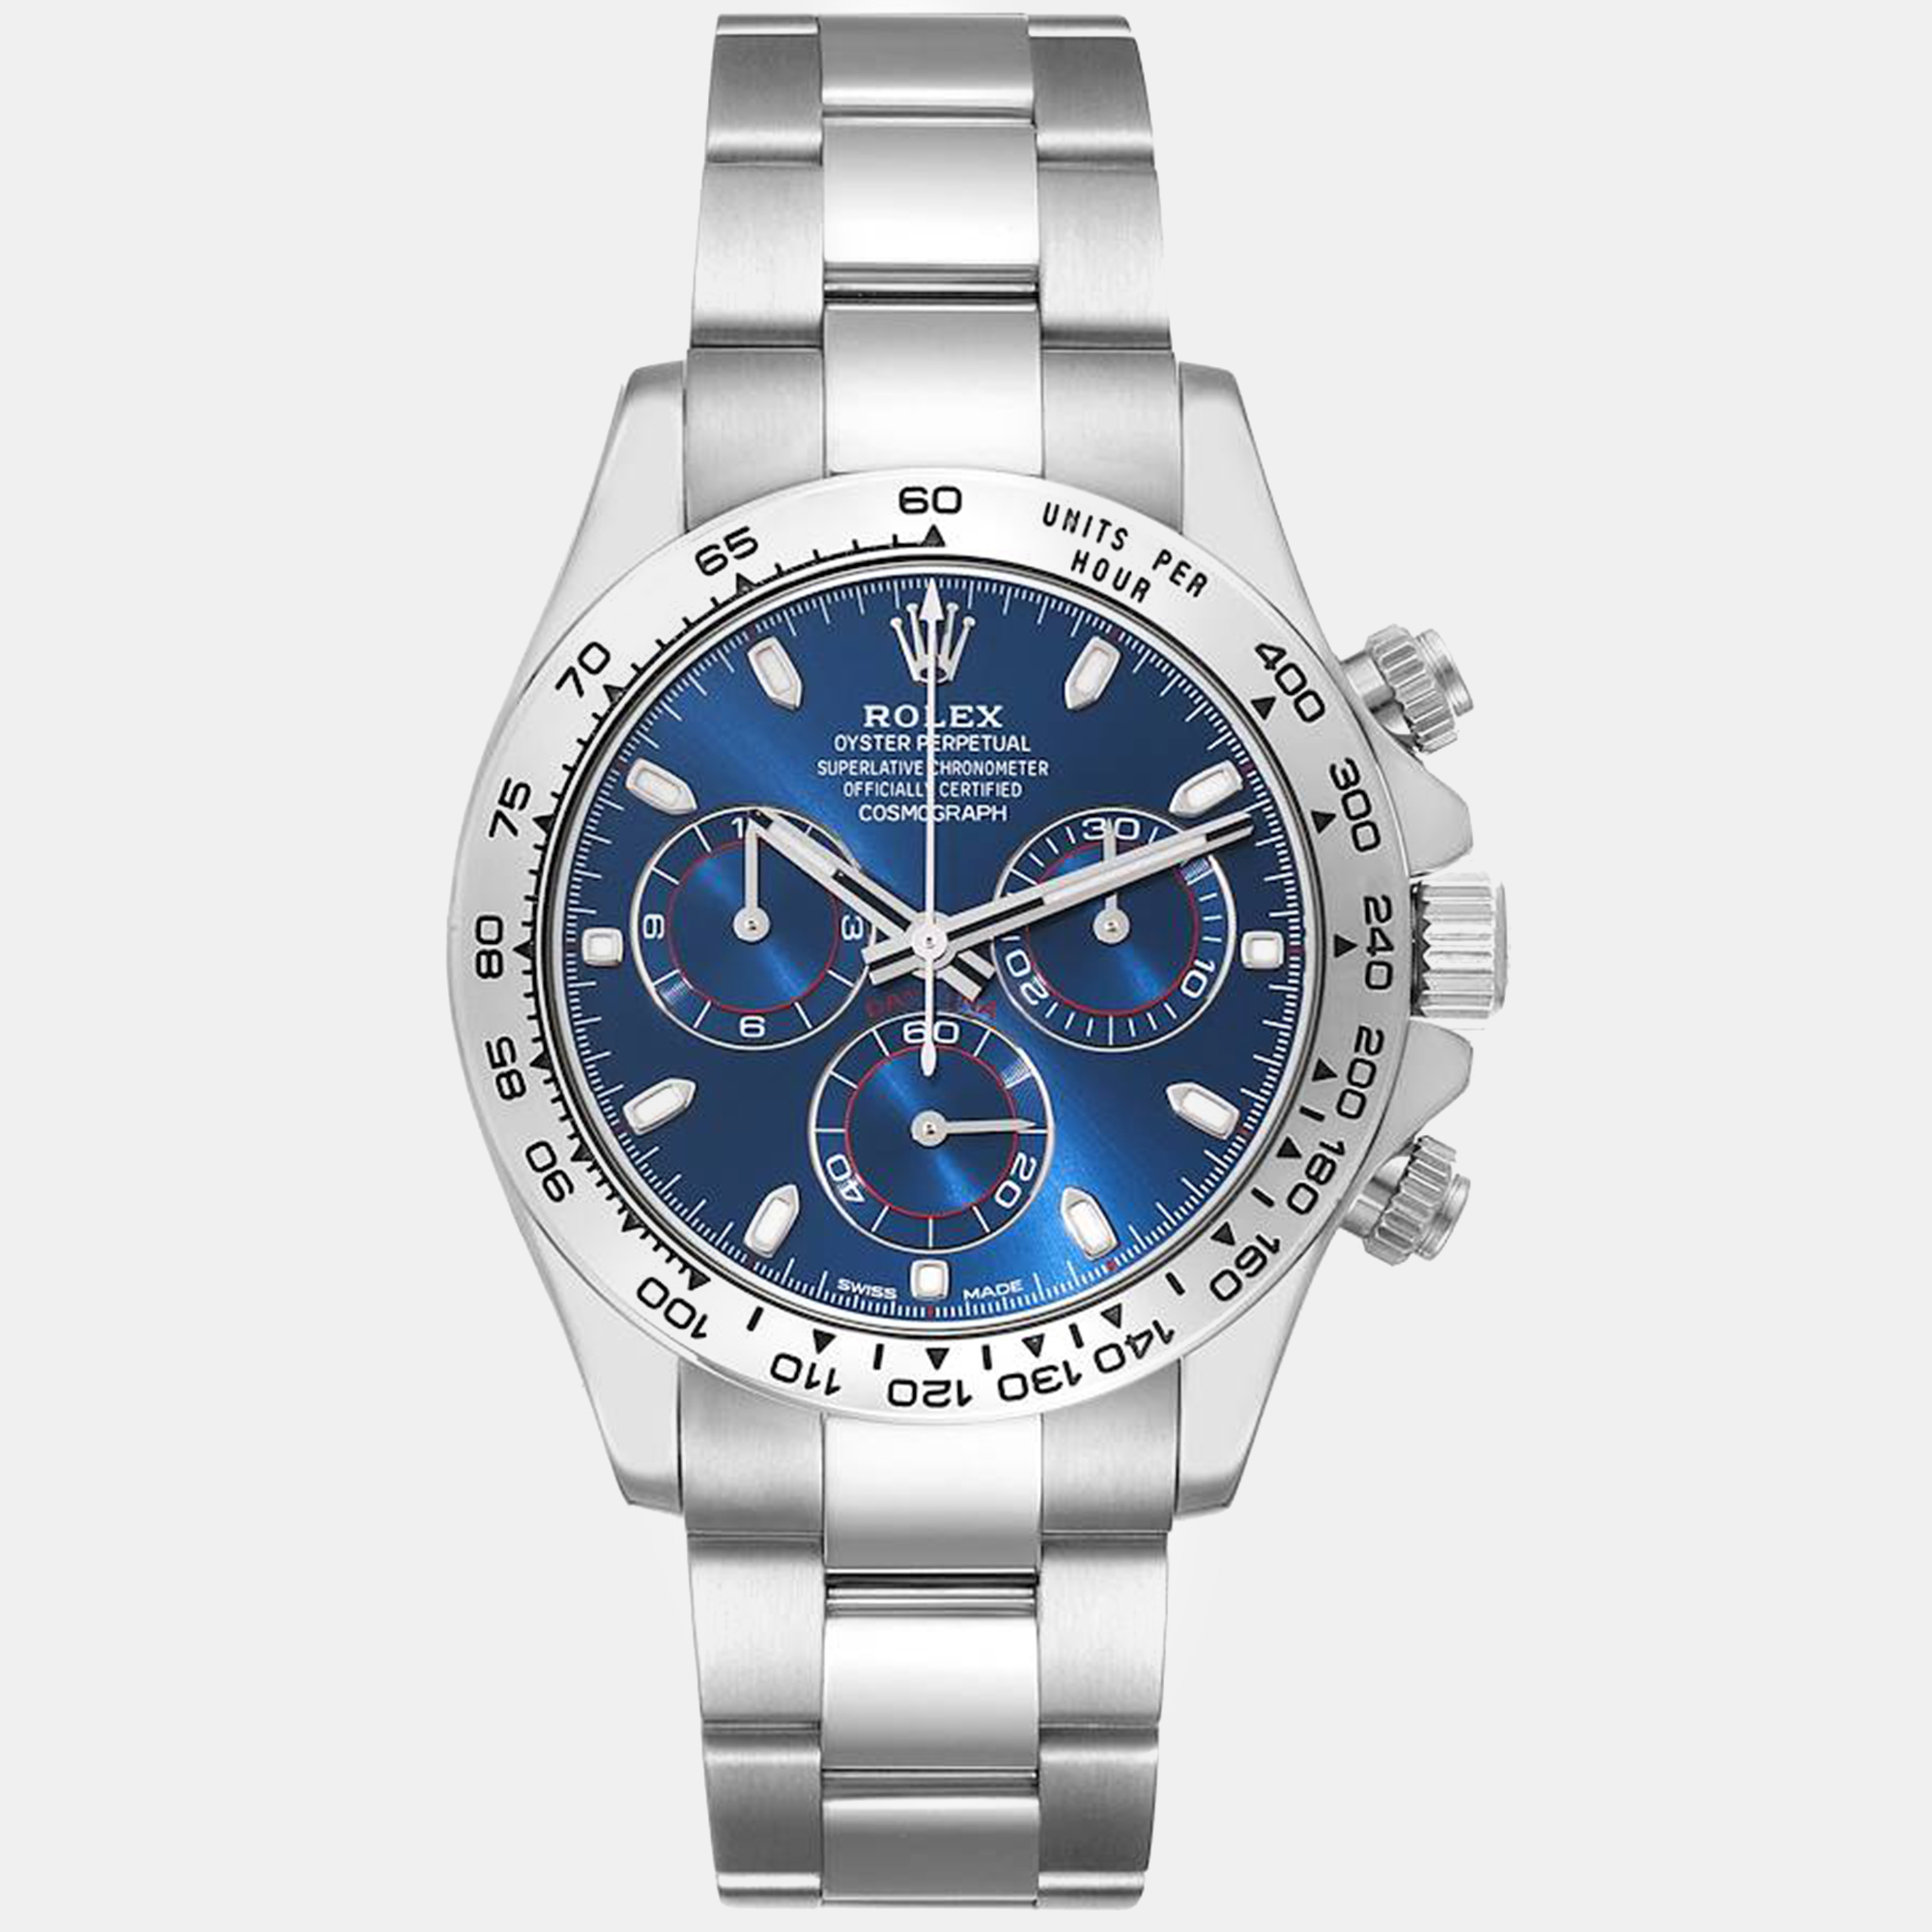 Pre-owned Rolex Daytona Blue Dial White Gold Chronograph Men's Watch 116509 40 Mm